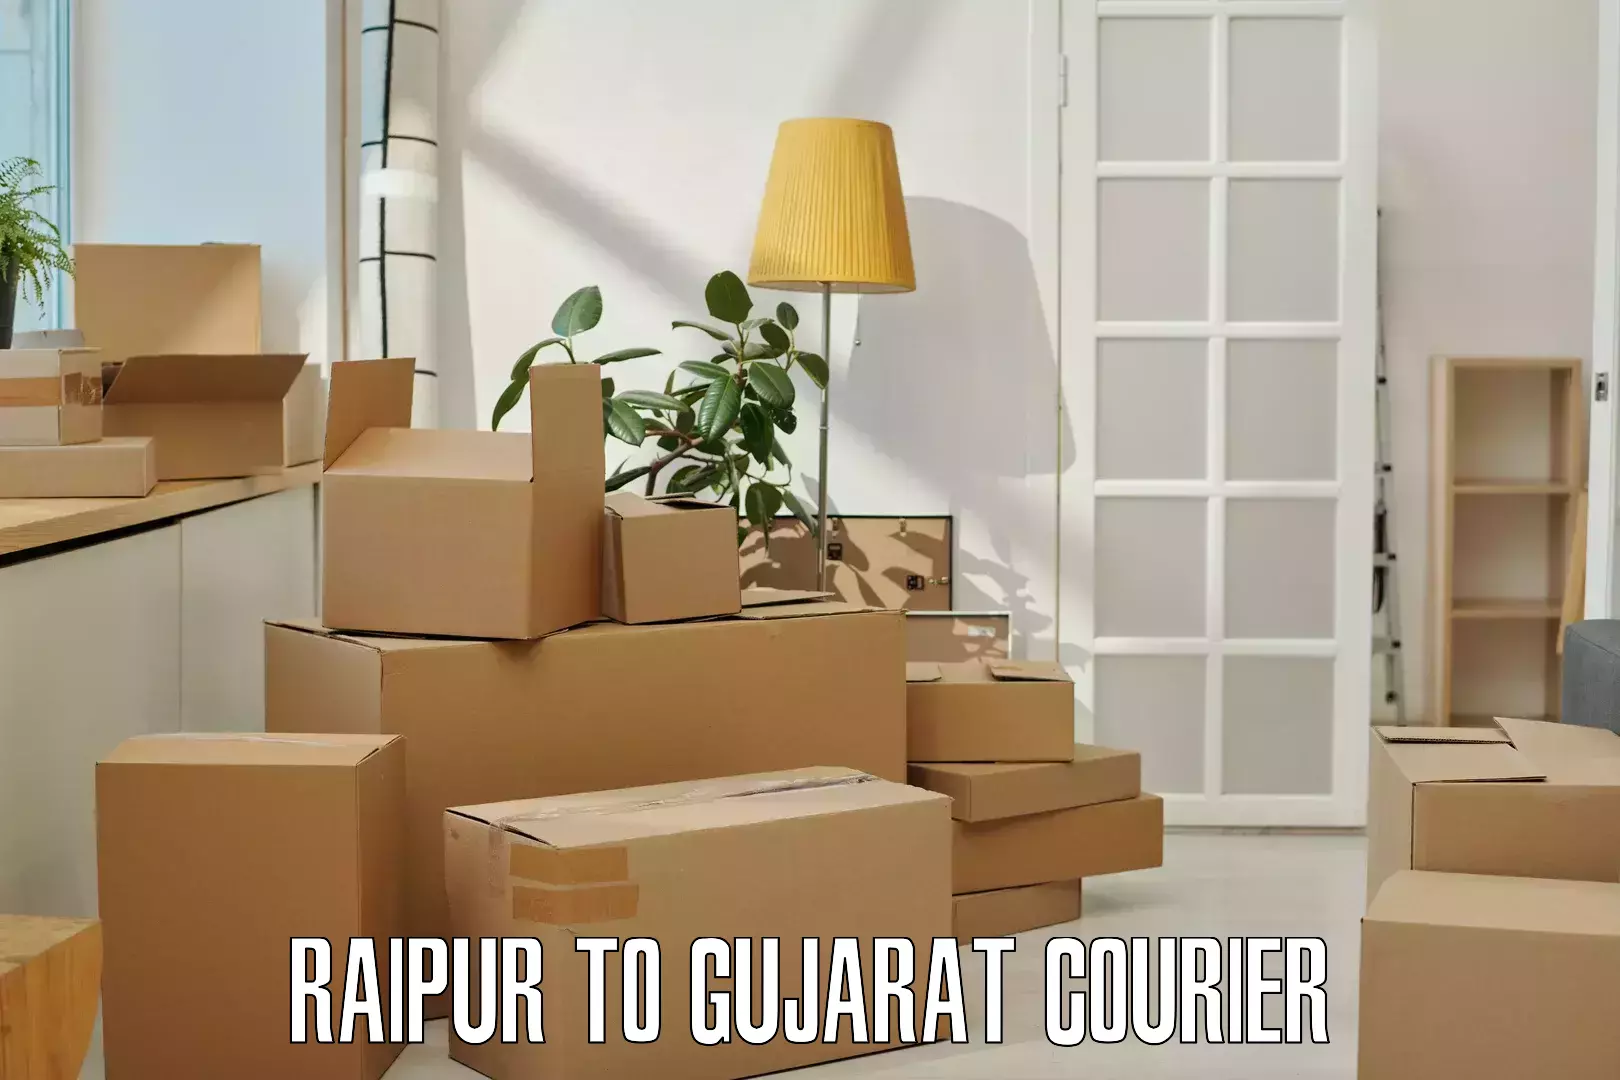 24/7 courier service Raipur to Ahmedabad